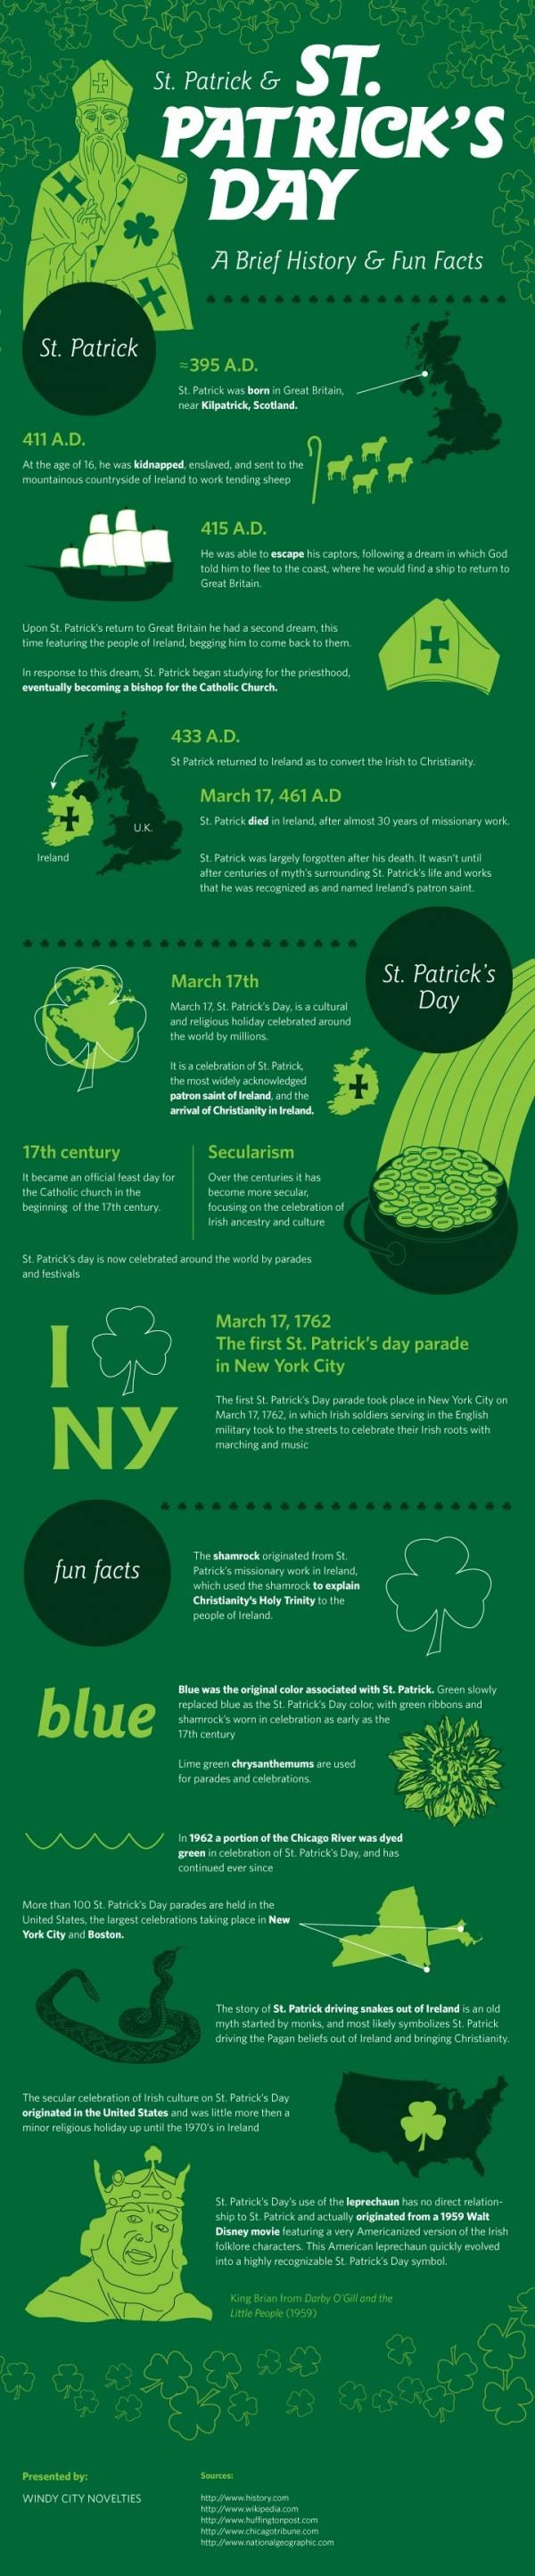 History of St Patrick's Day